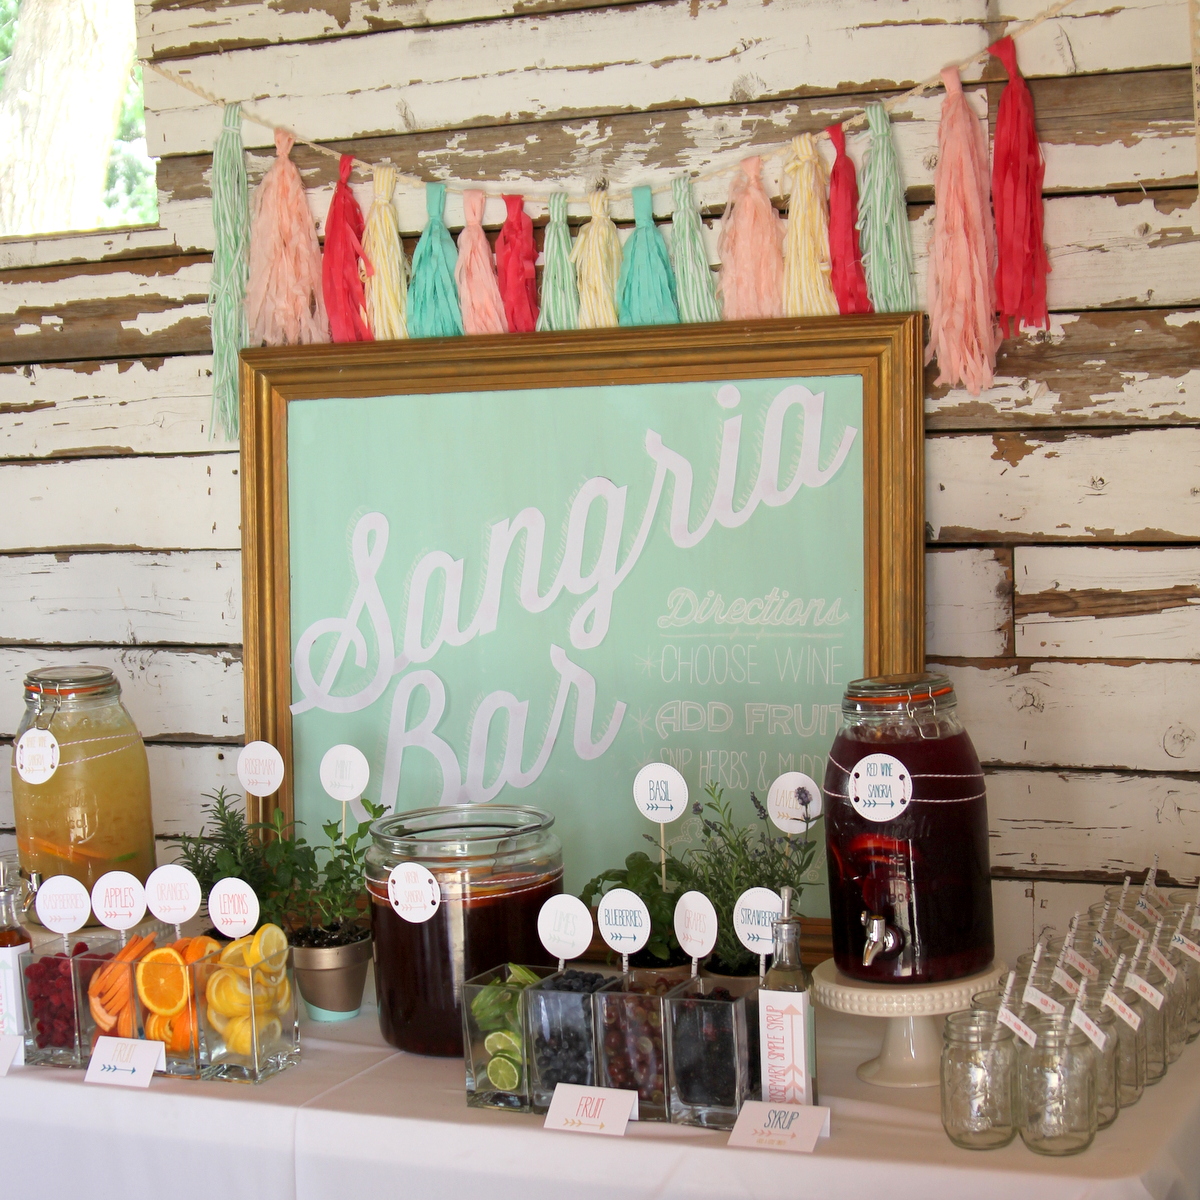 Epic Drink Station Ideas for Your Reception